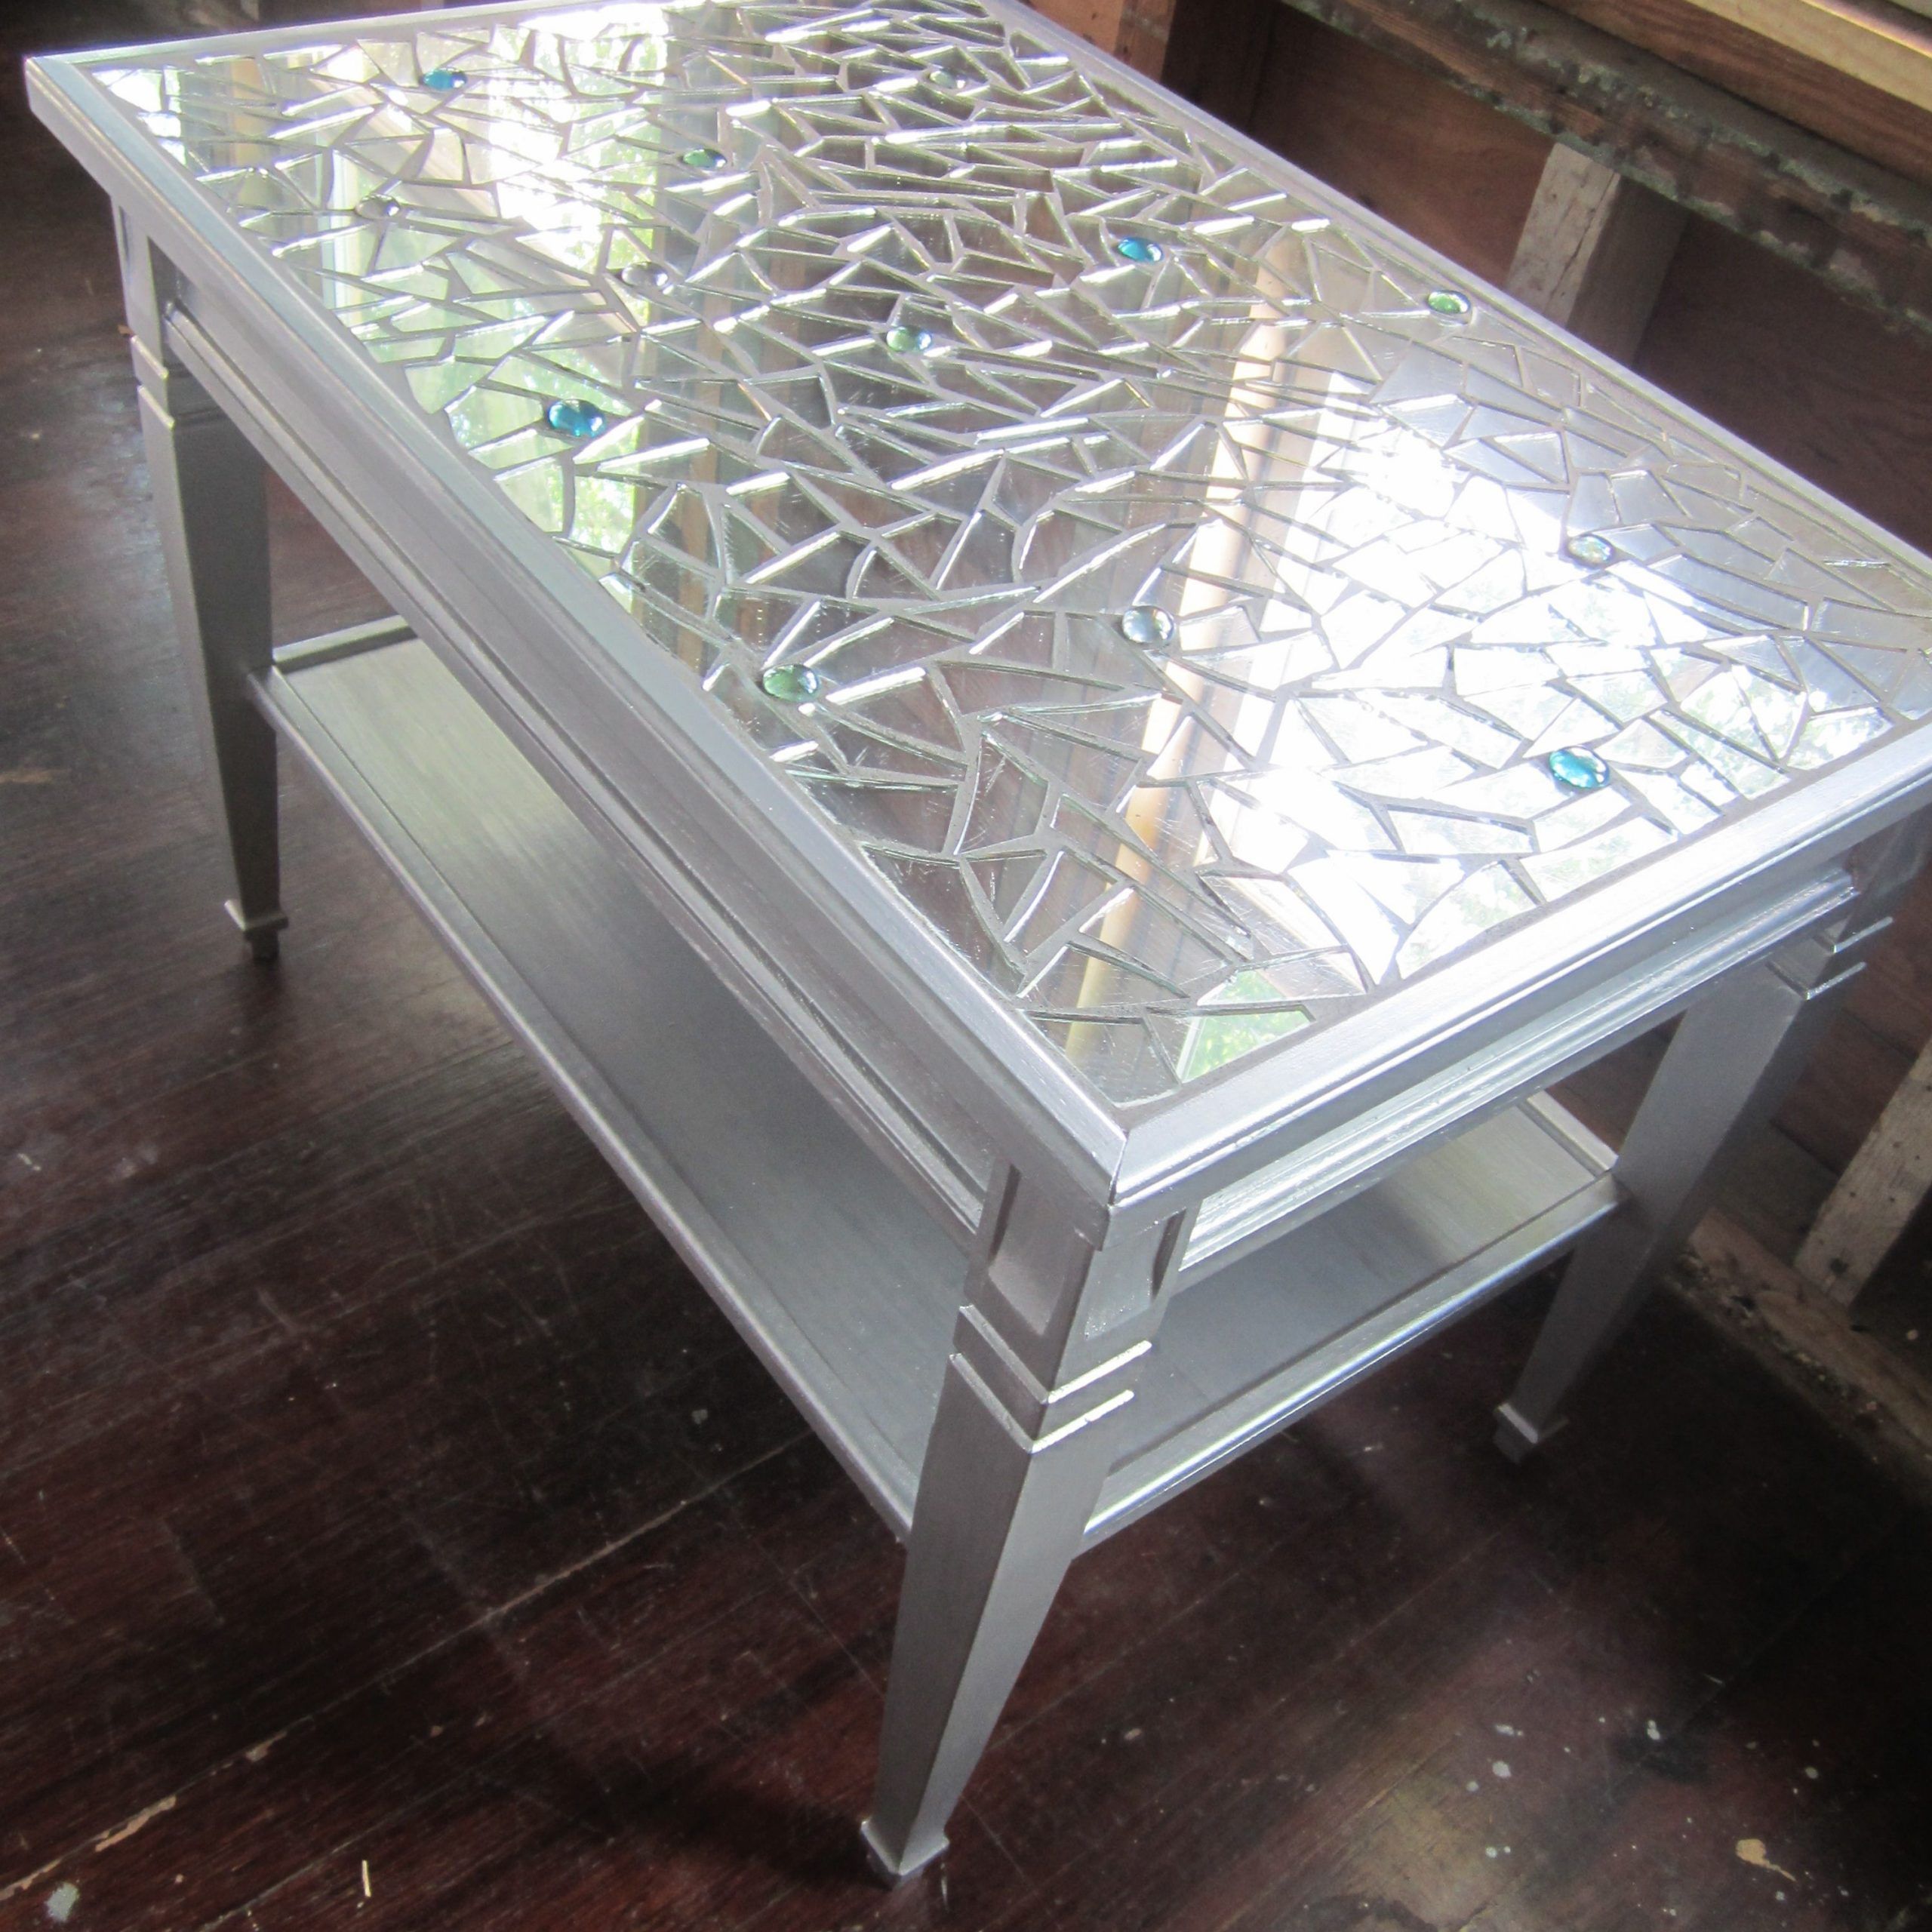 Preferred Antique Silver Metal Coffee Tables Throughout Mosaic Mirror Metallic Silver Coffee Table Or Side Table (View 14 of 20)